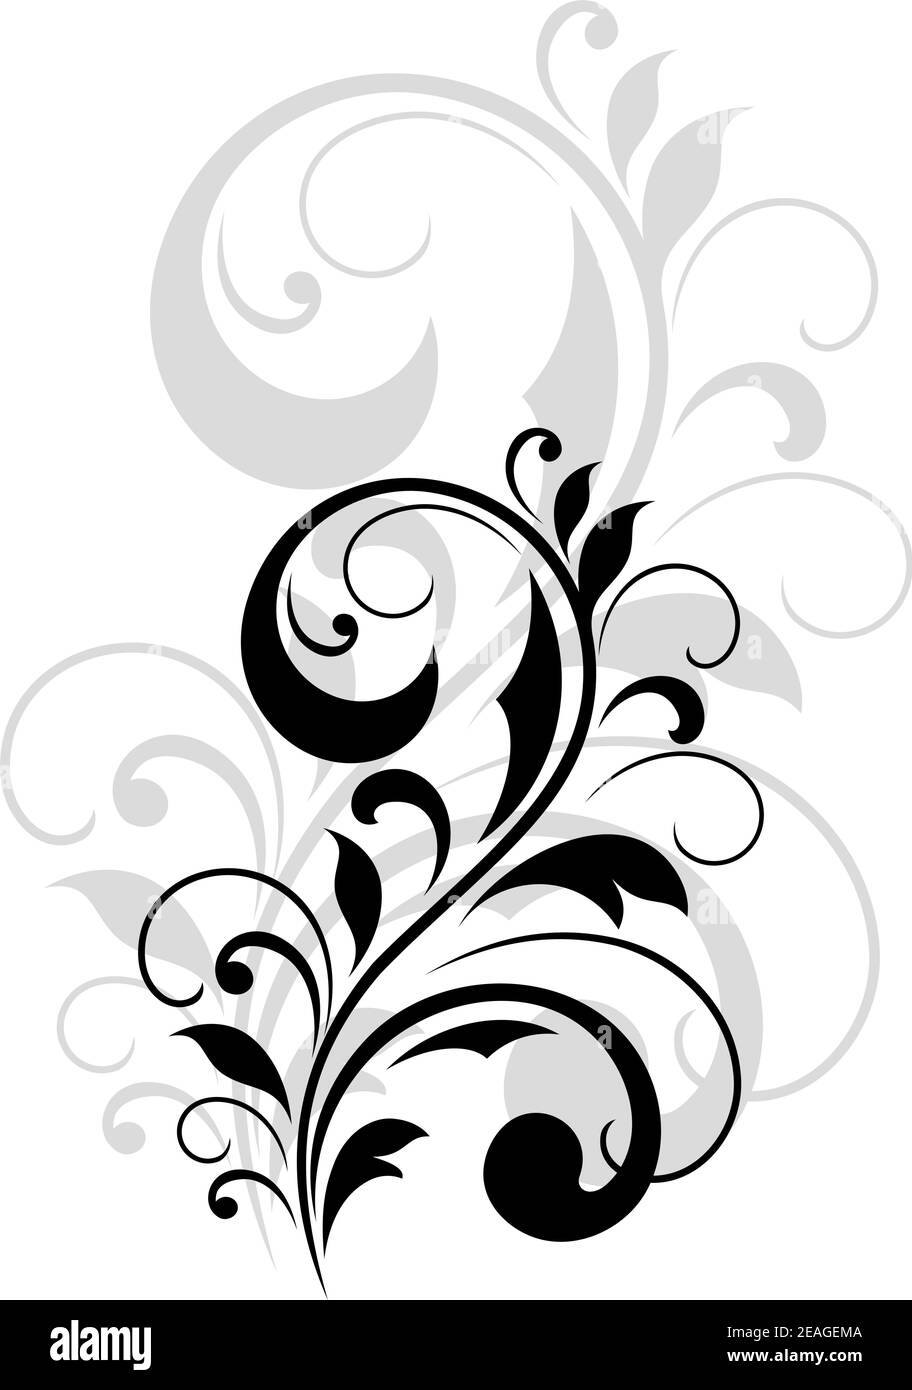 Pretty vintage swirling foliate design element in a dainty black calligraphic silhouette with a repeat enlarged motif in grey behind Stock Vector